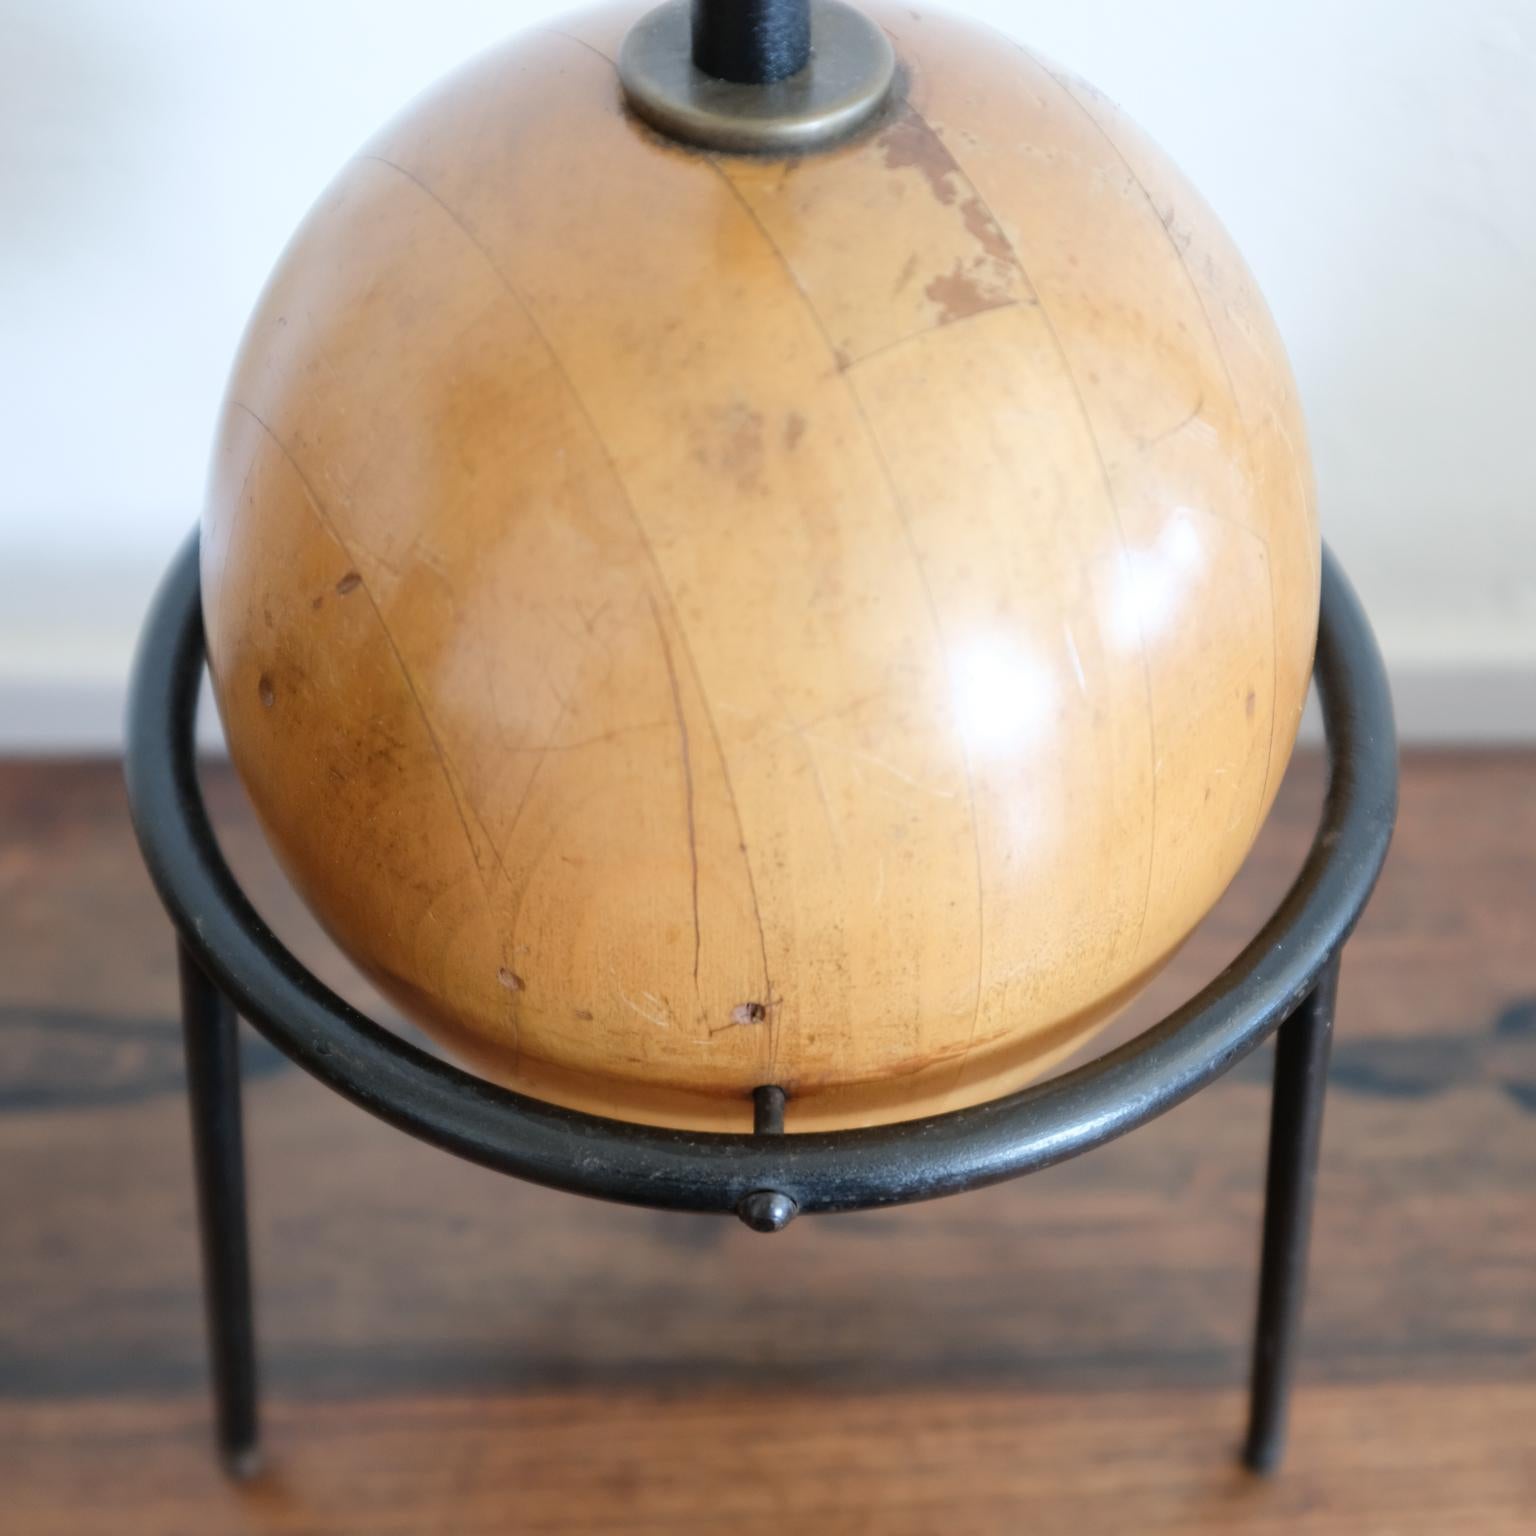 California Modern Iron and Wood Lamps by Albert Blake, 1951 For Sale 2